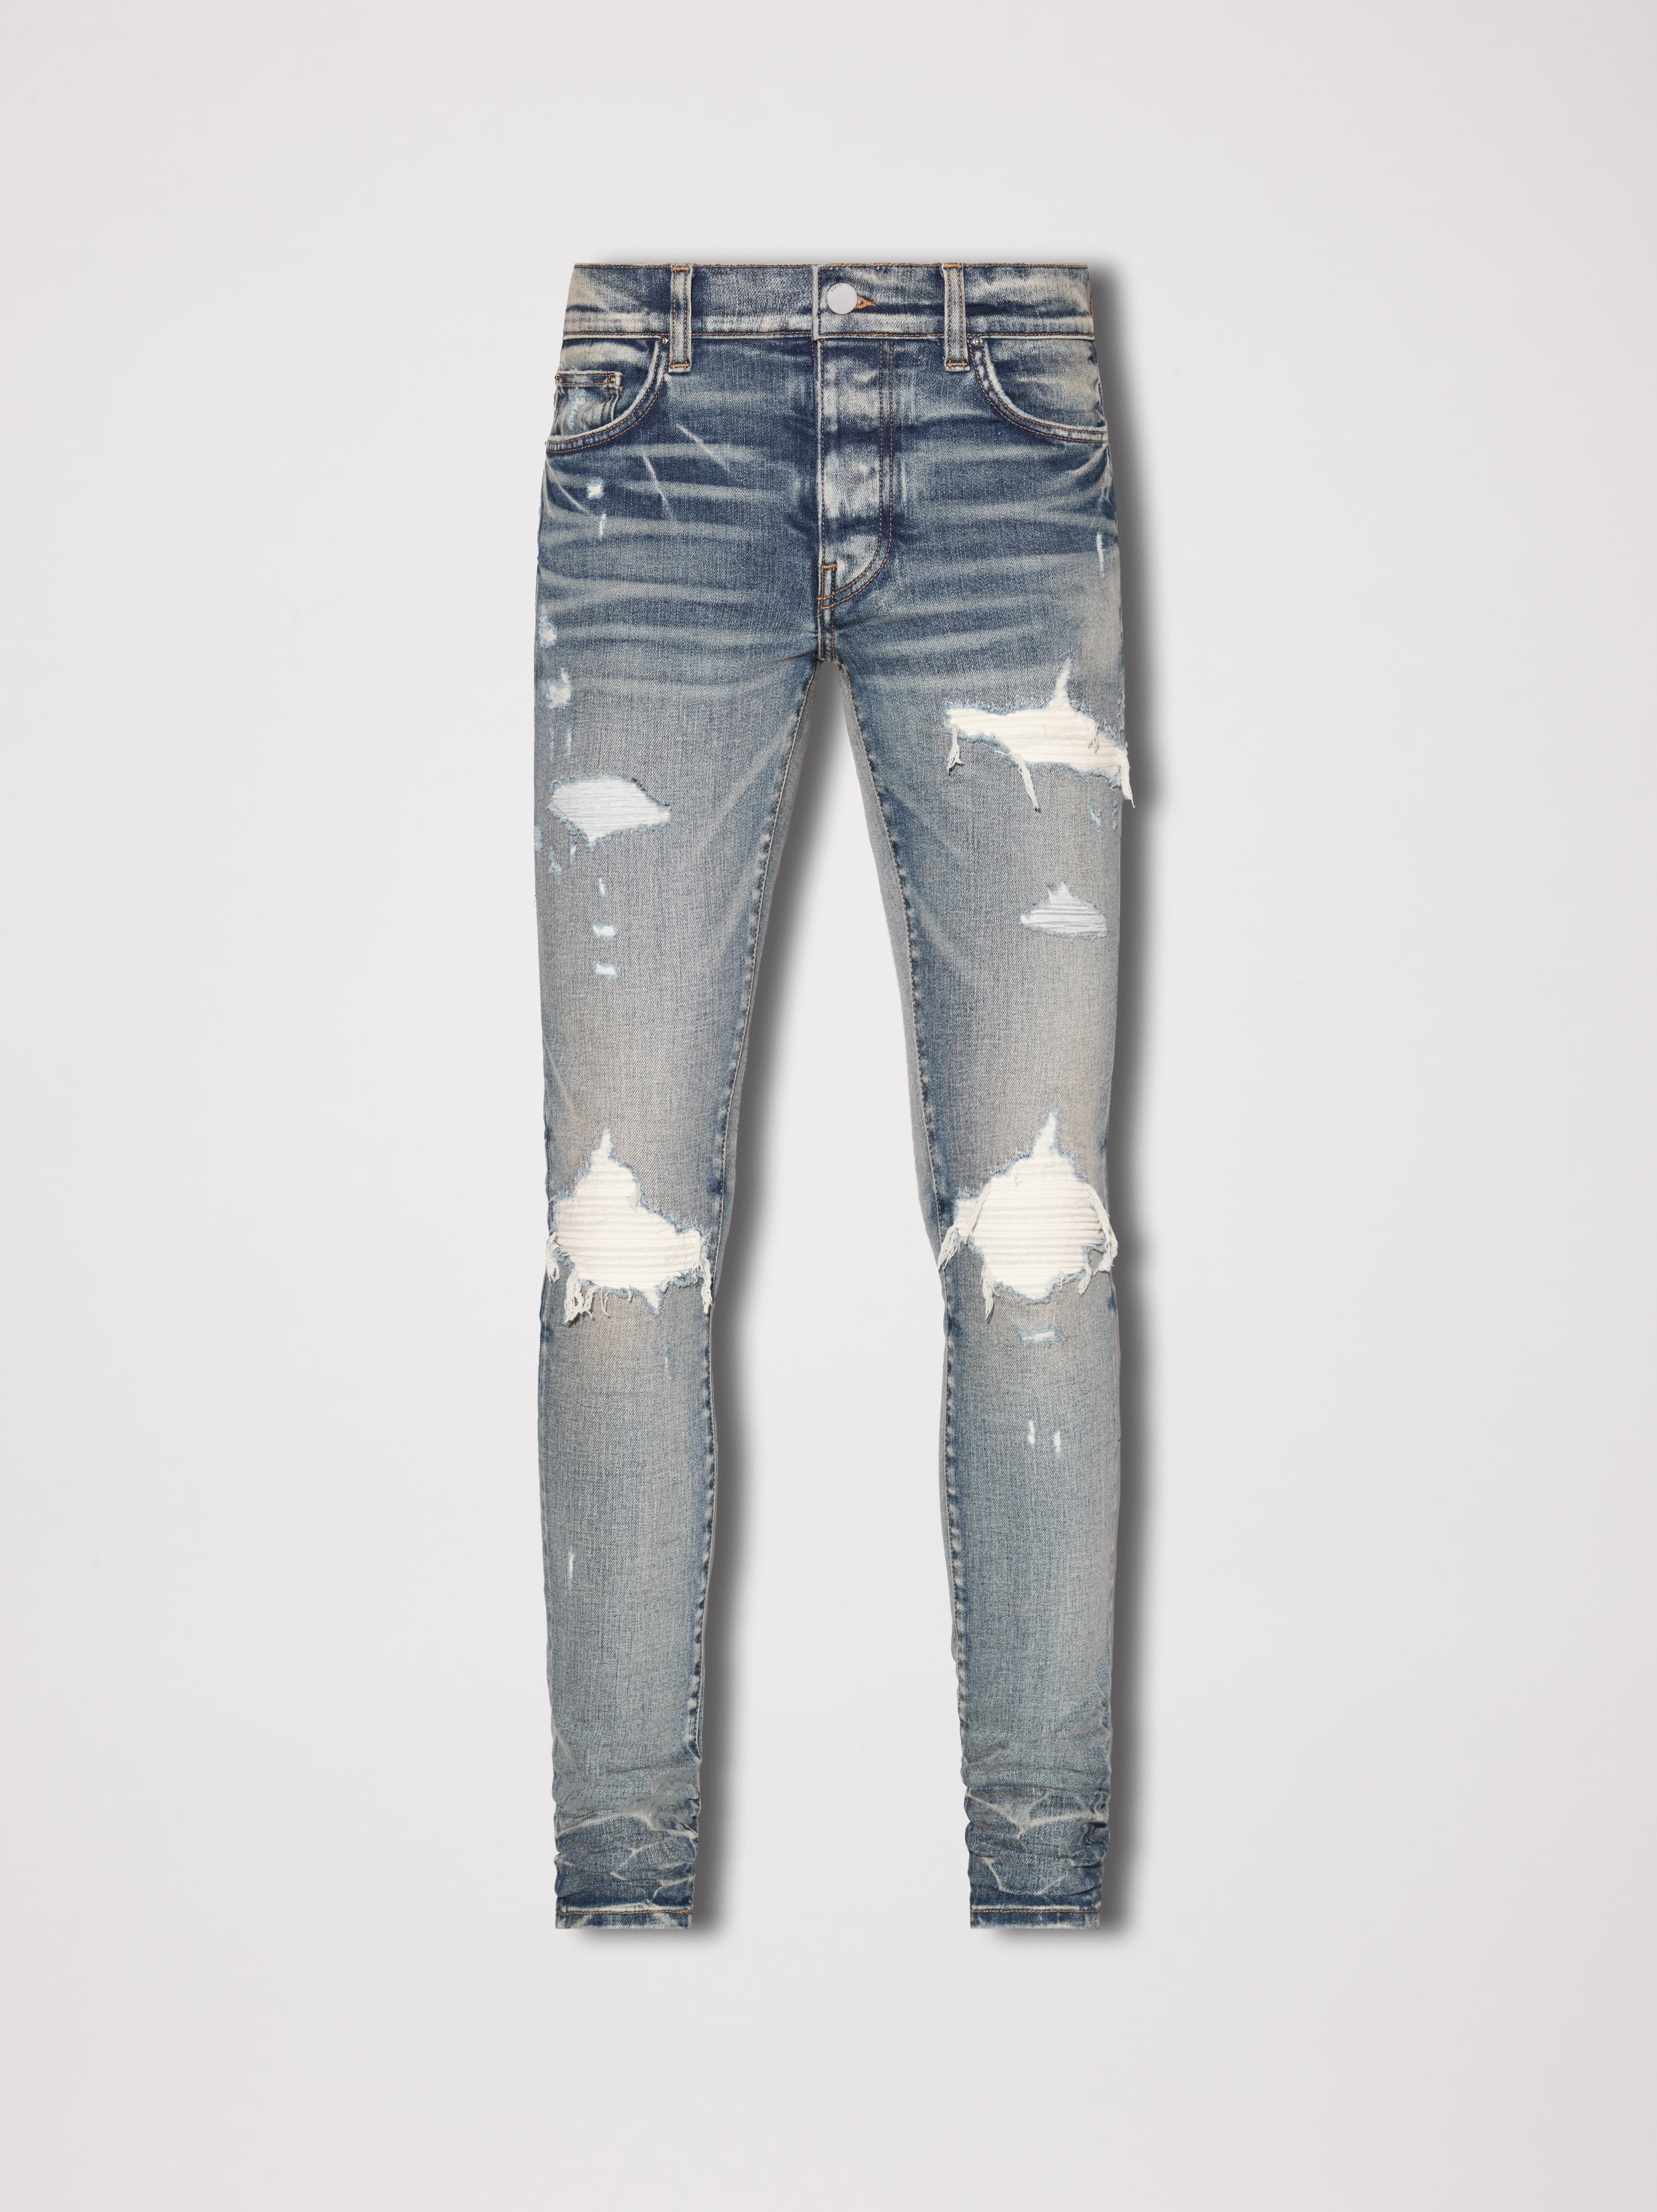 Product MX1 ULTRA SUEDE JEAN - CLAY INDIGO featured image